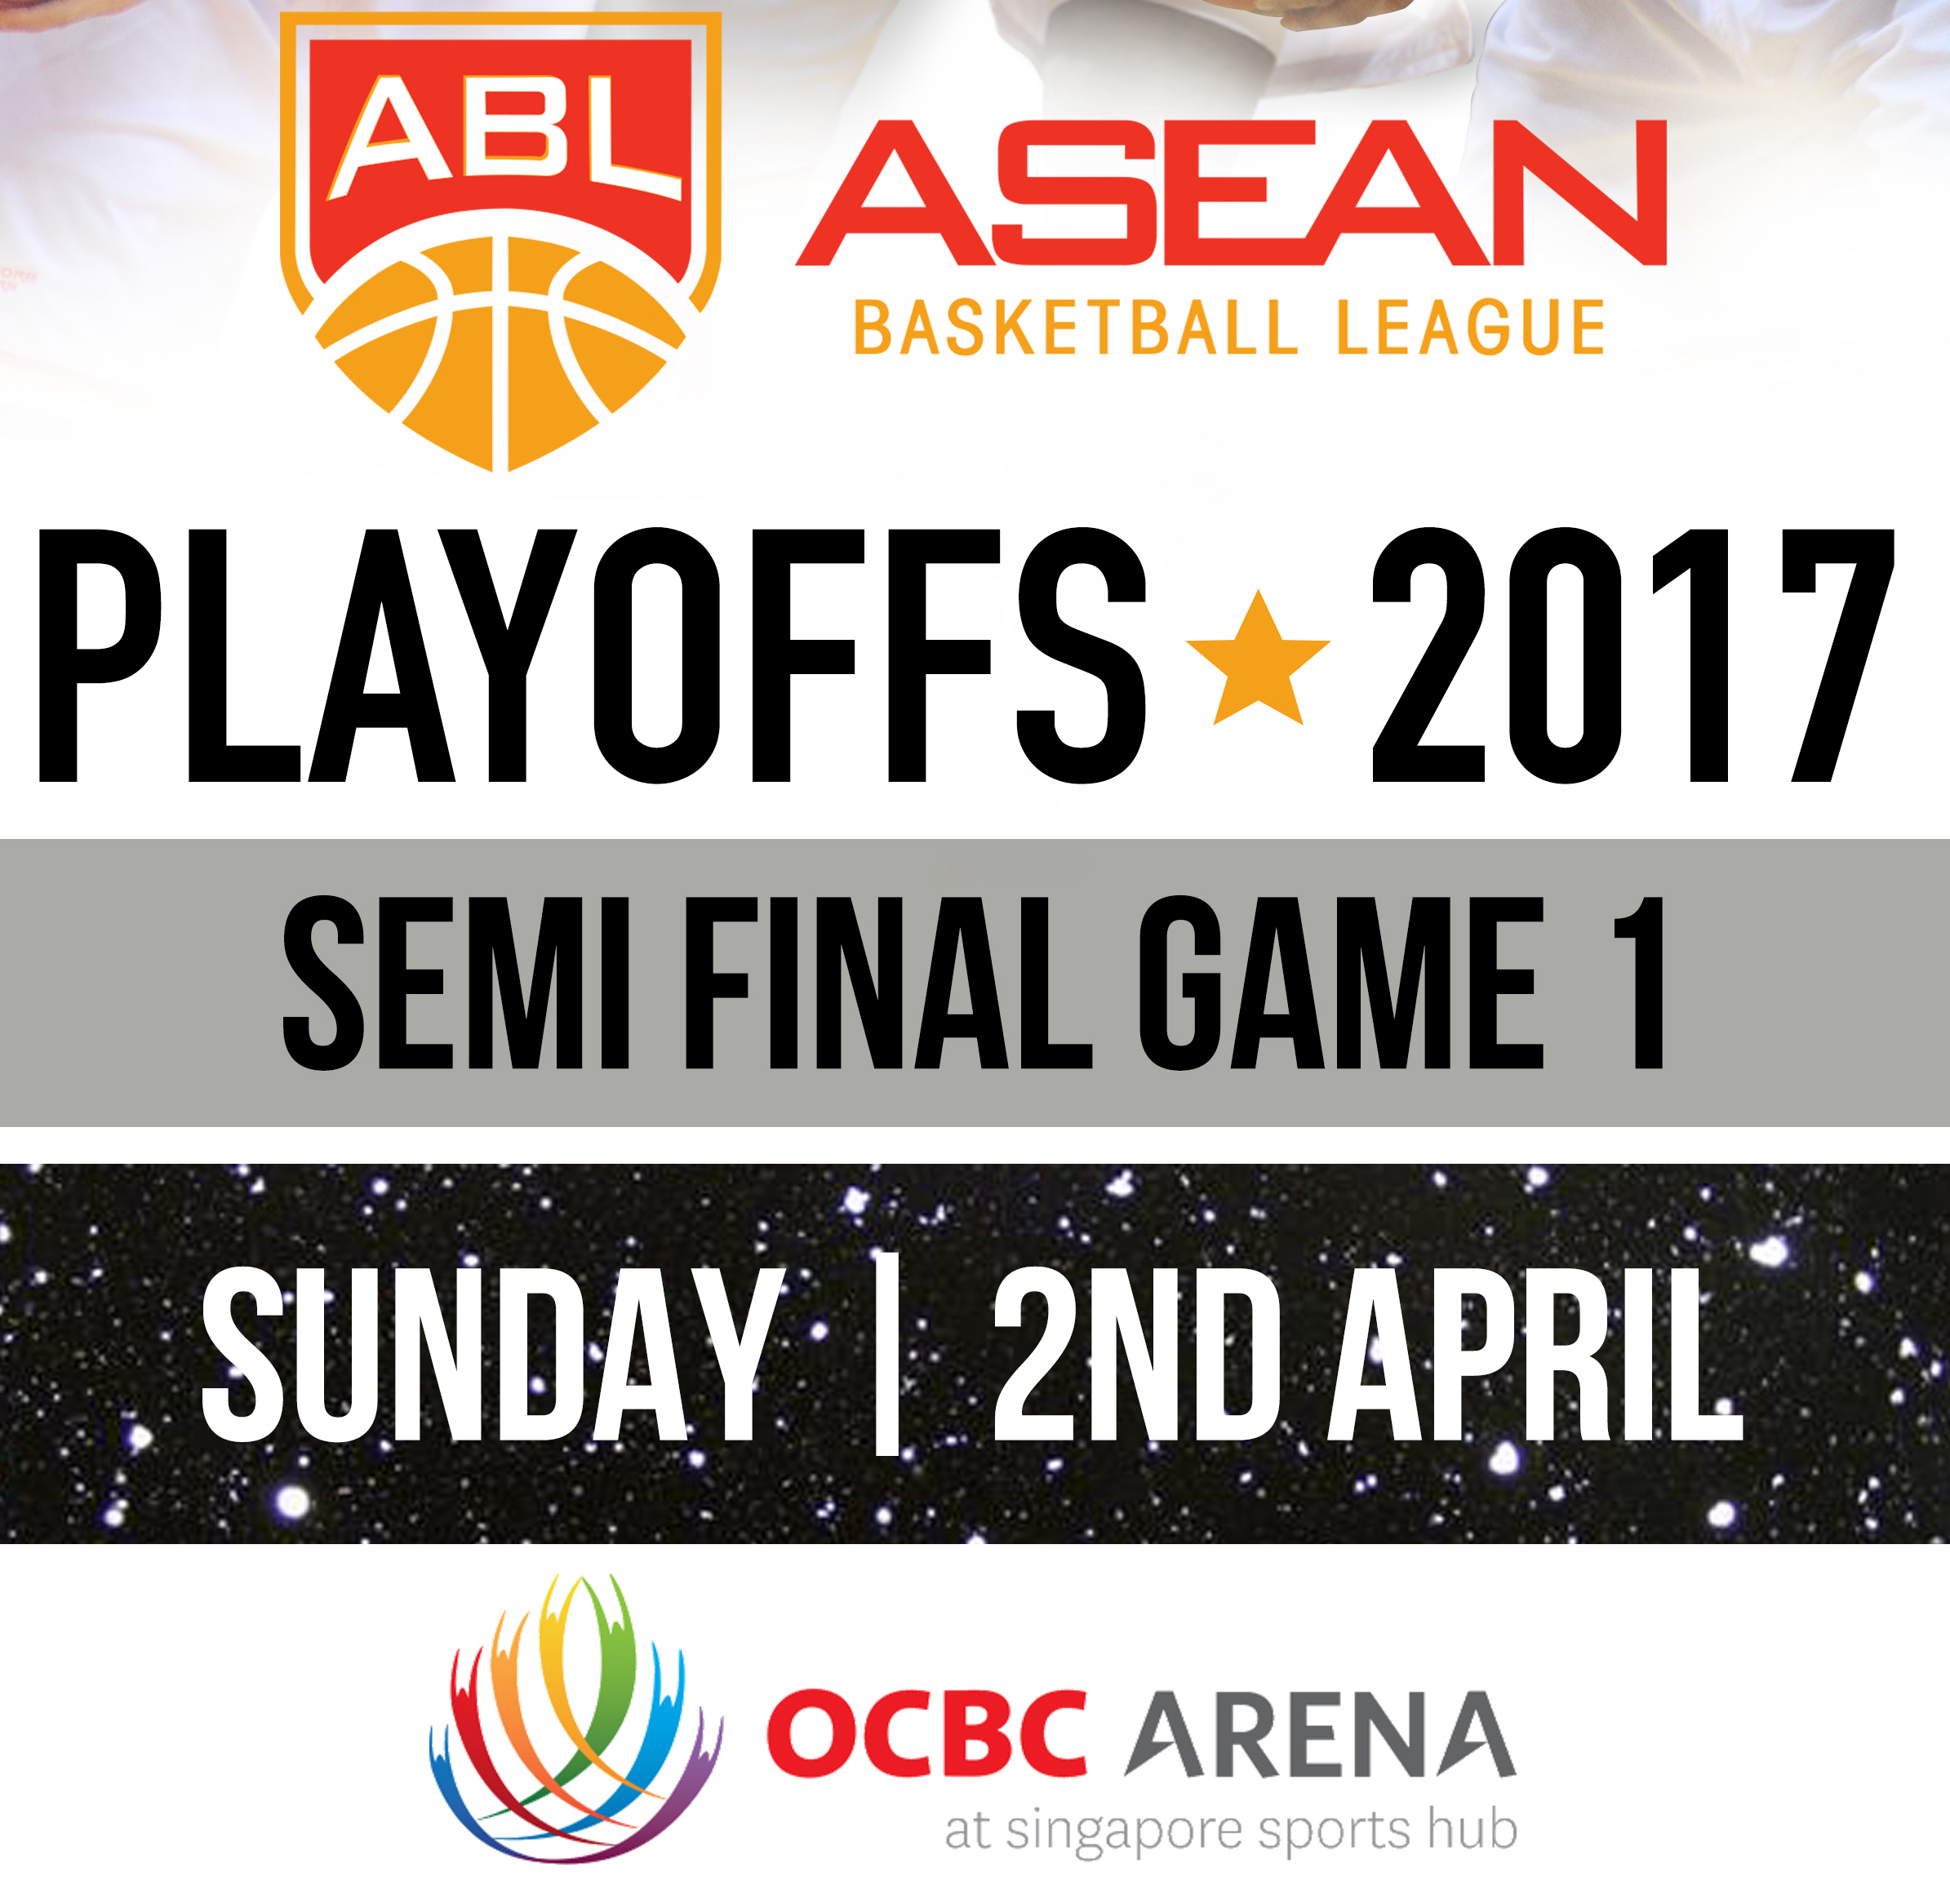 Singapore Slingers set to face Alab Pilipinas in 2016-17 ABL Semi Finals